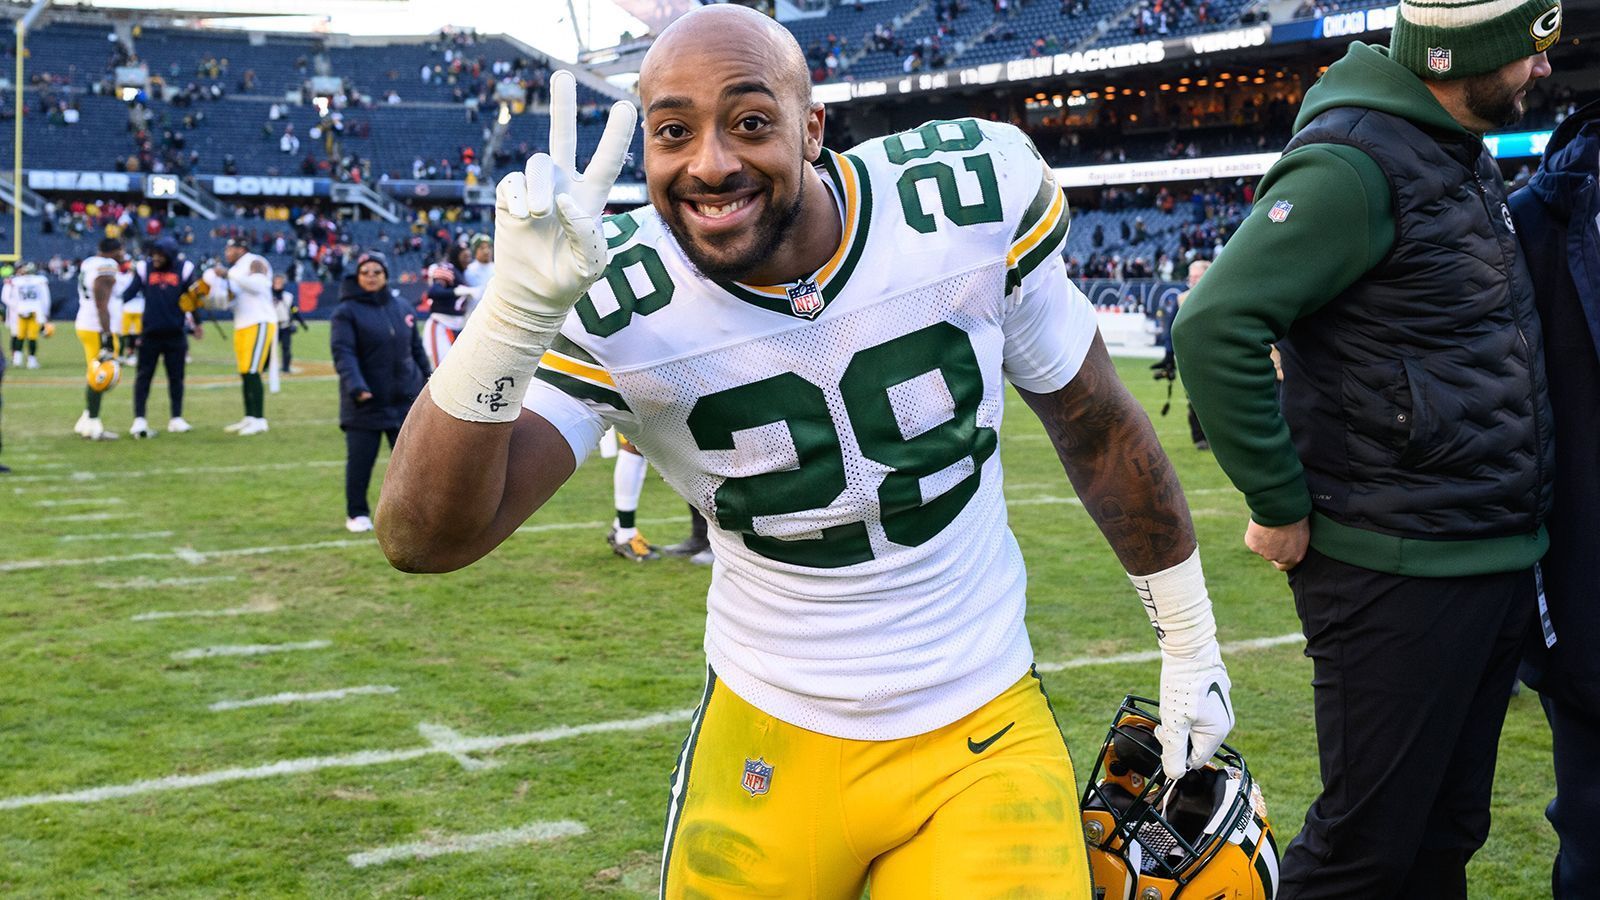 
                <strong>A.J. Dillon</strong><br>
                &#x2022; vollständiger Name: Algiers Jameal William Dillon Jr.<br>&#x2022; Team: Green Bay Packers<br>&#x2022; Position: Running Back<br>
              